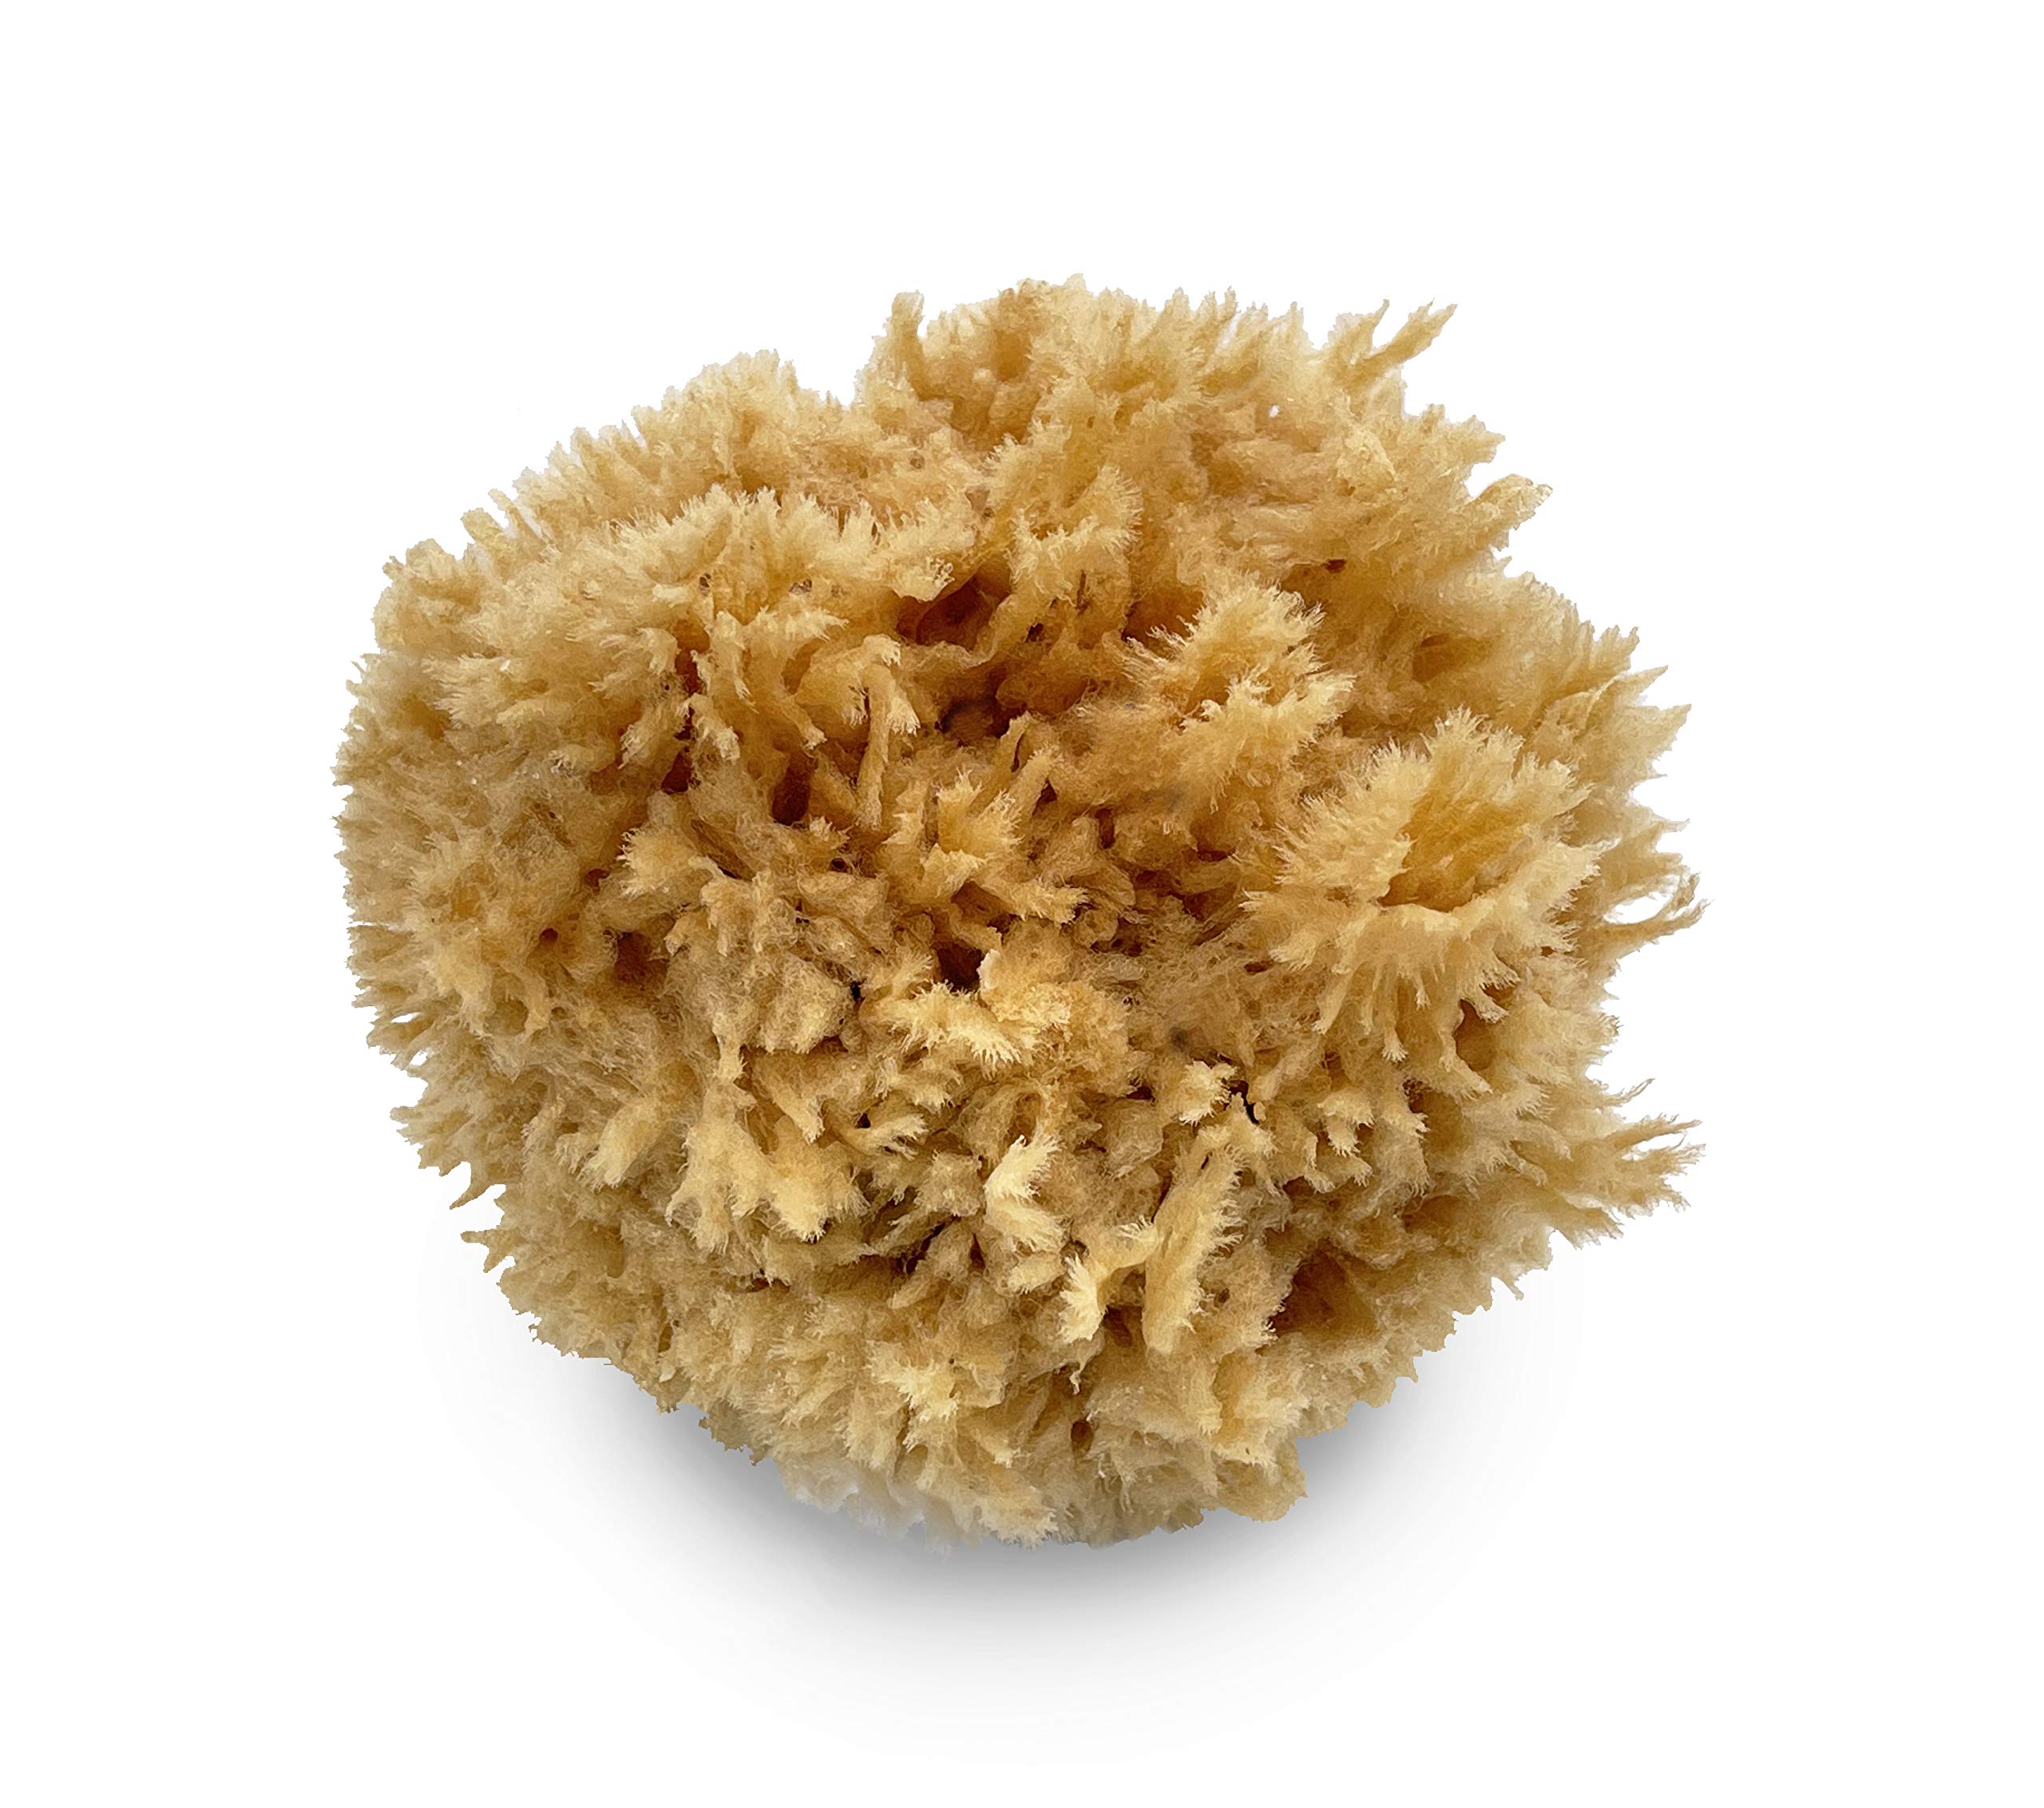 Sea Wool Sponge 5-6 inch (Large) by Bath & Shower Express Natural Renewable Resource!